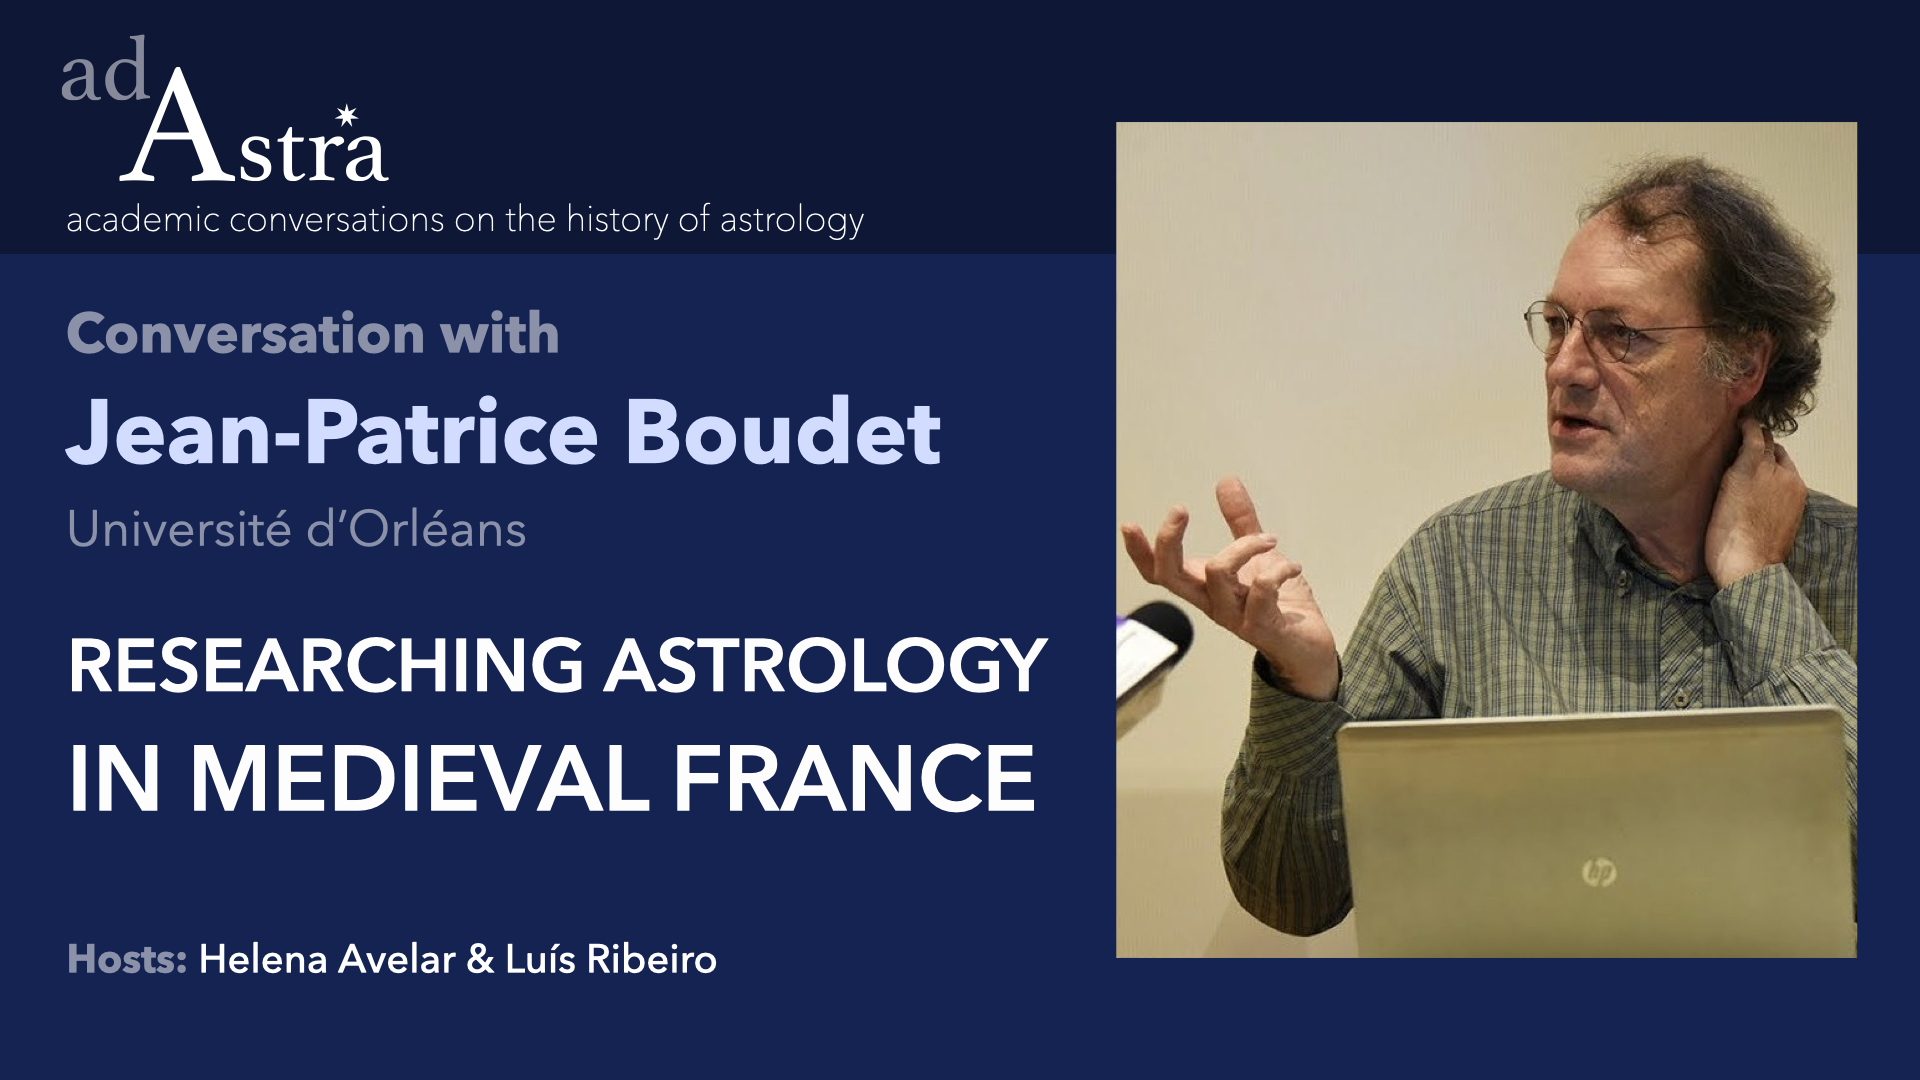 Researching astrology in Medieval France with Jean-Patrice Boudet